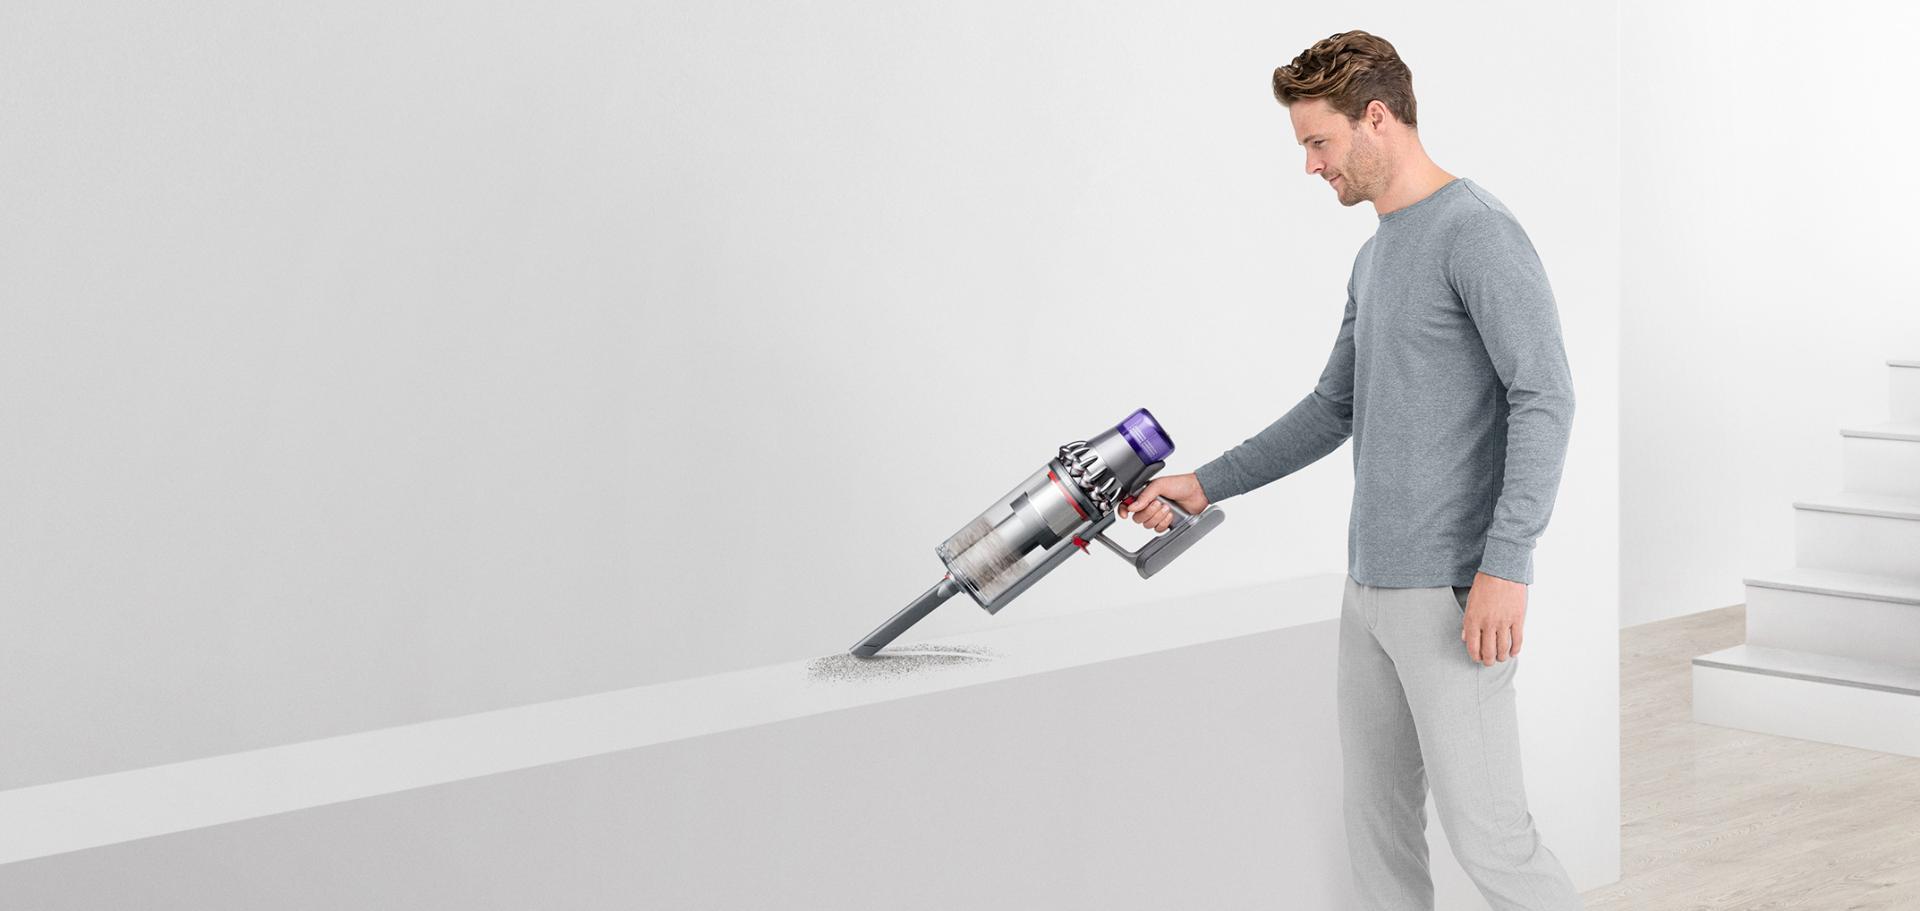 Man vacuuming a shelf with the Dyson Outsize vacuum.